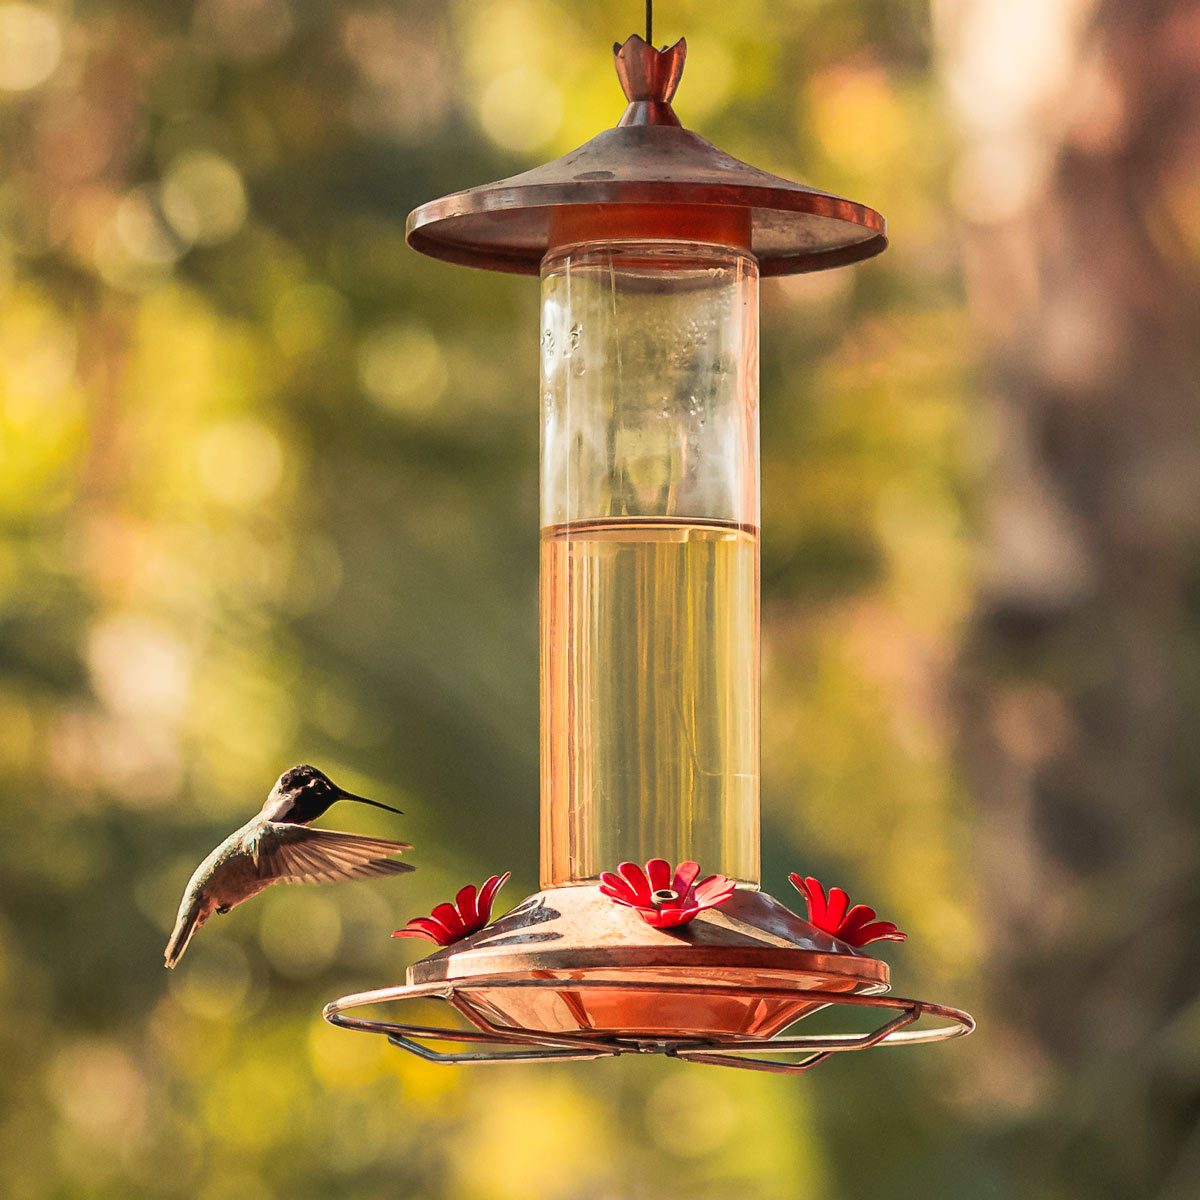 13 Questions About Hummingbird Feeders Answered By The Pros,How To Make Sweet Potato Pie From Scratch